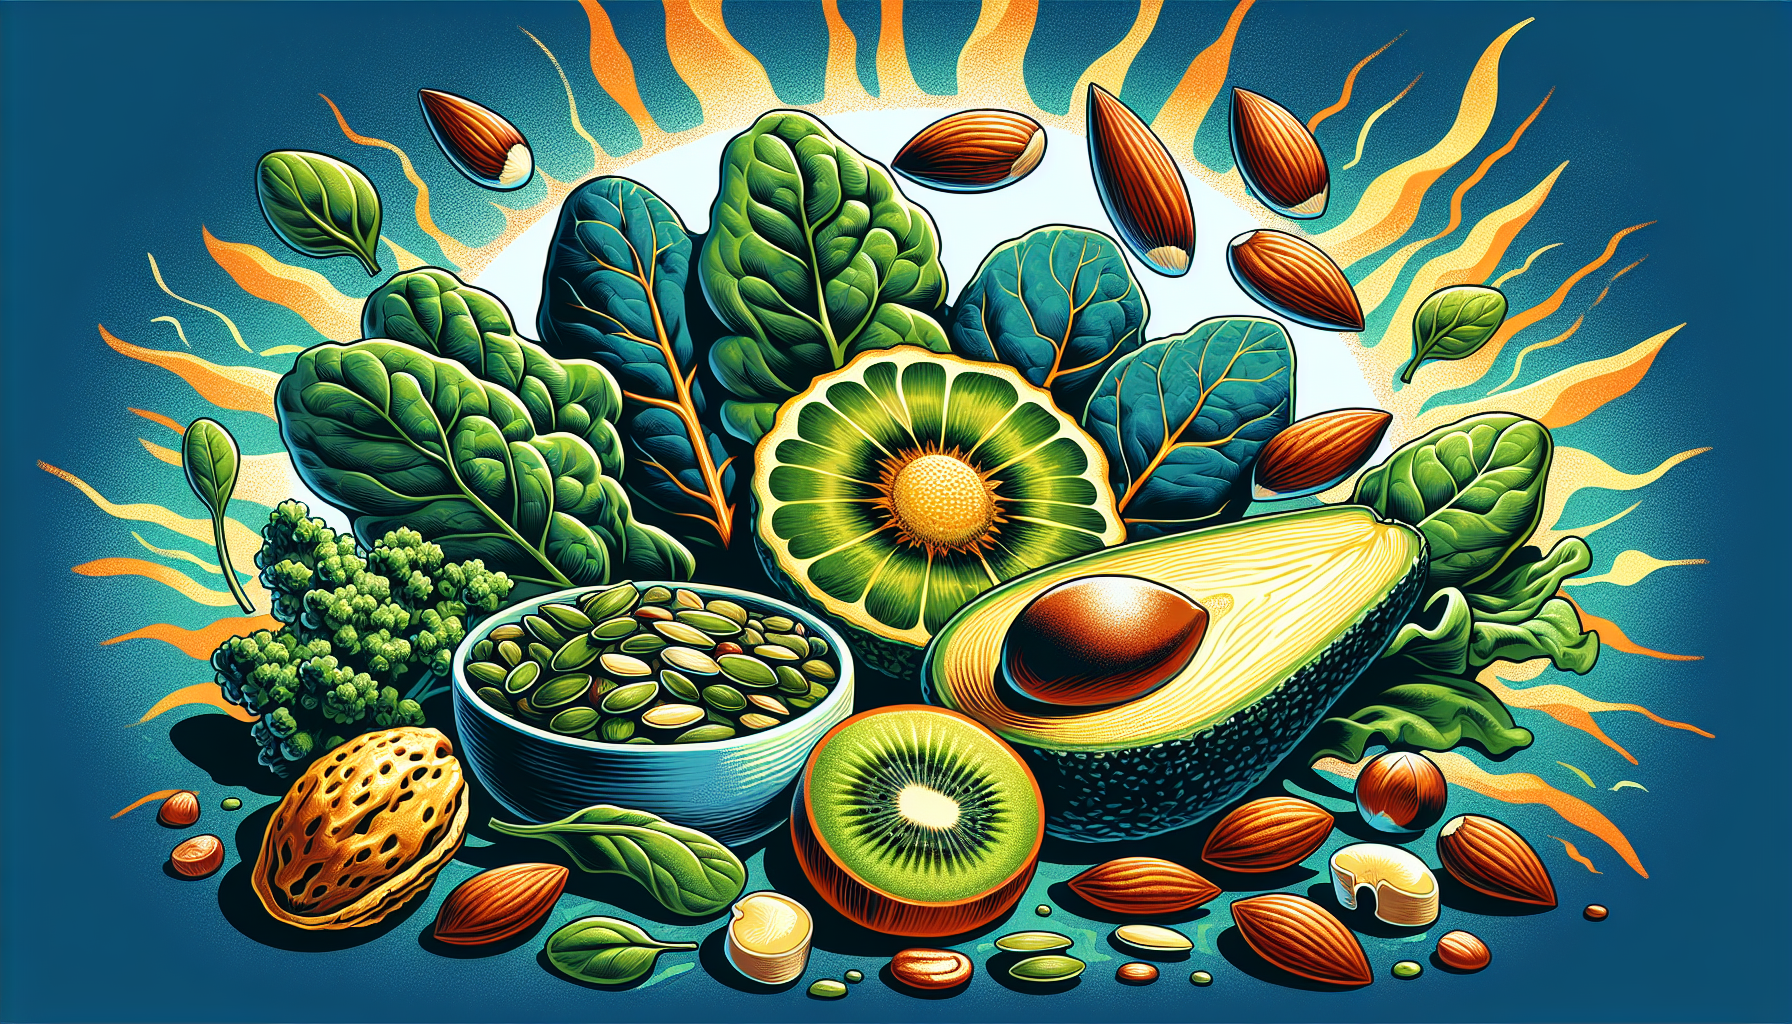 Illustration of nuts, seeds, and green leafy vegetables rich in vitamin E